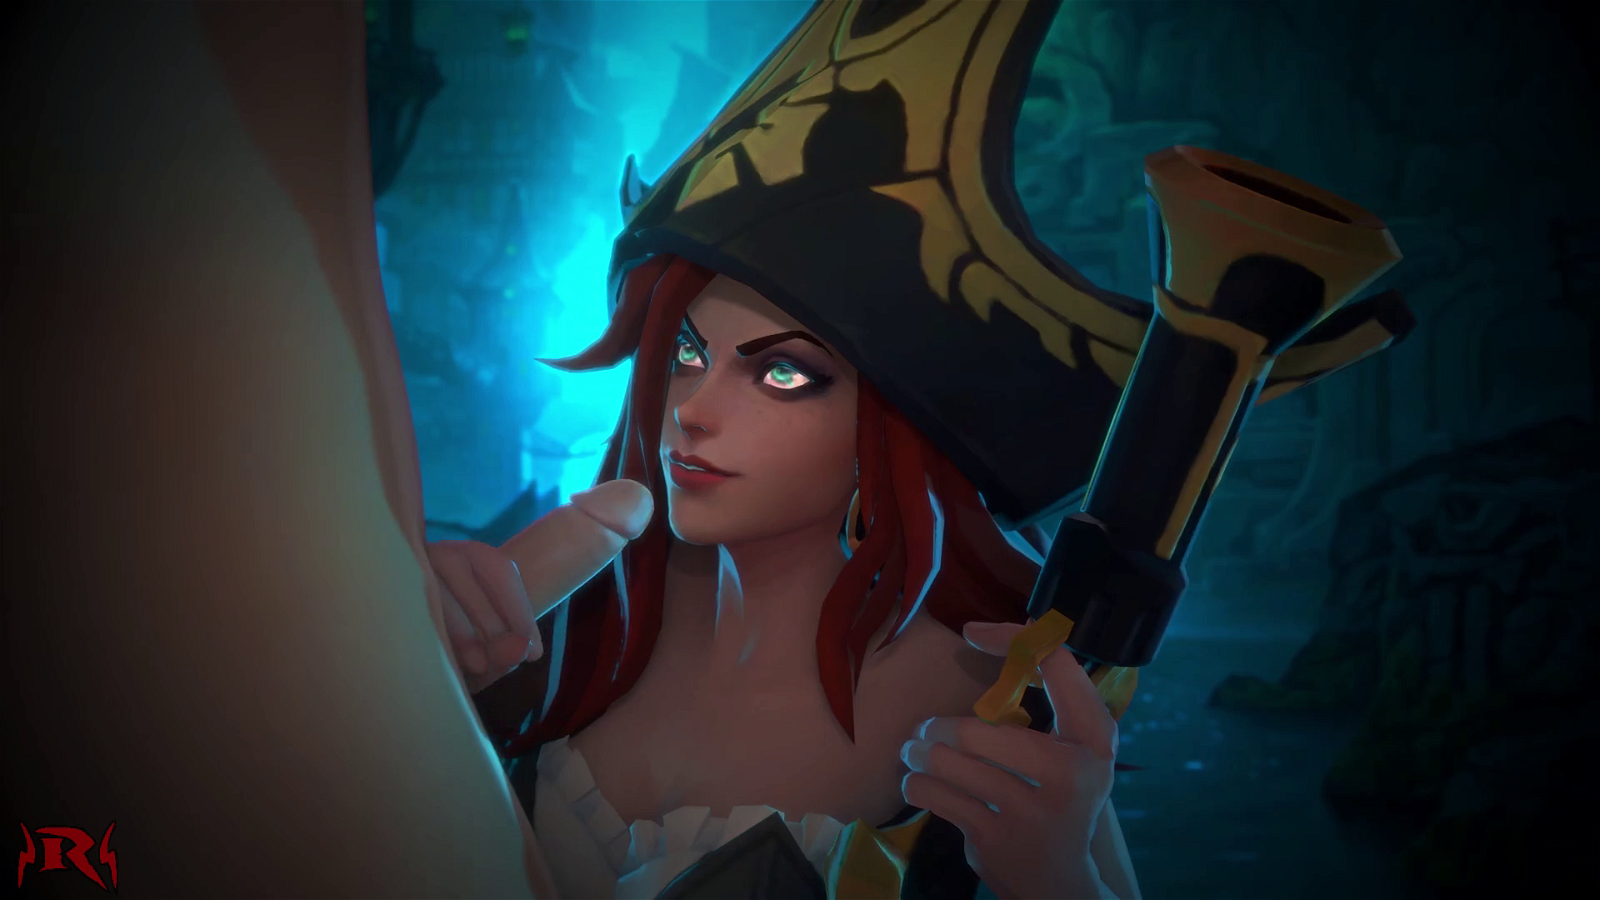 Video by Rexx with the username @rexxworld, who is a verified user,  August 20, 2020 at 1:45 AM. The post is about the topic 3D Animation Gaming and the text says '[SOUND] (League of Legends) The Deal
#3D #LeagueOfLegends #MissFortune #Handjob
Like what I do? Funding links in my profile, or just send some Flame'